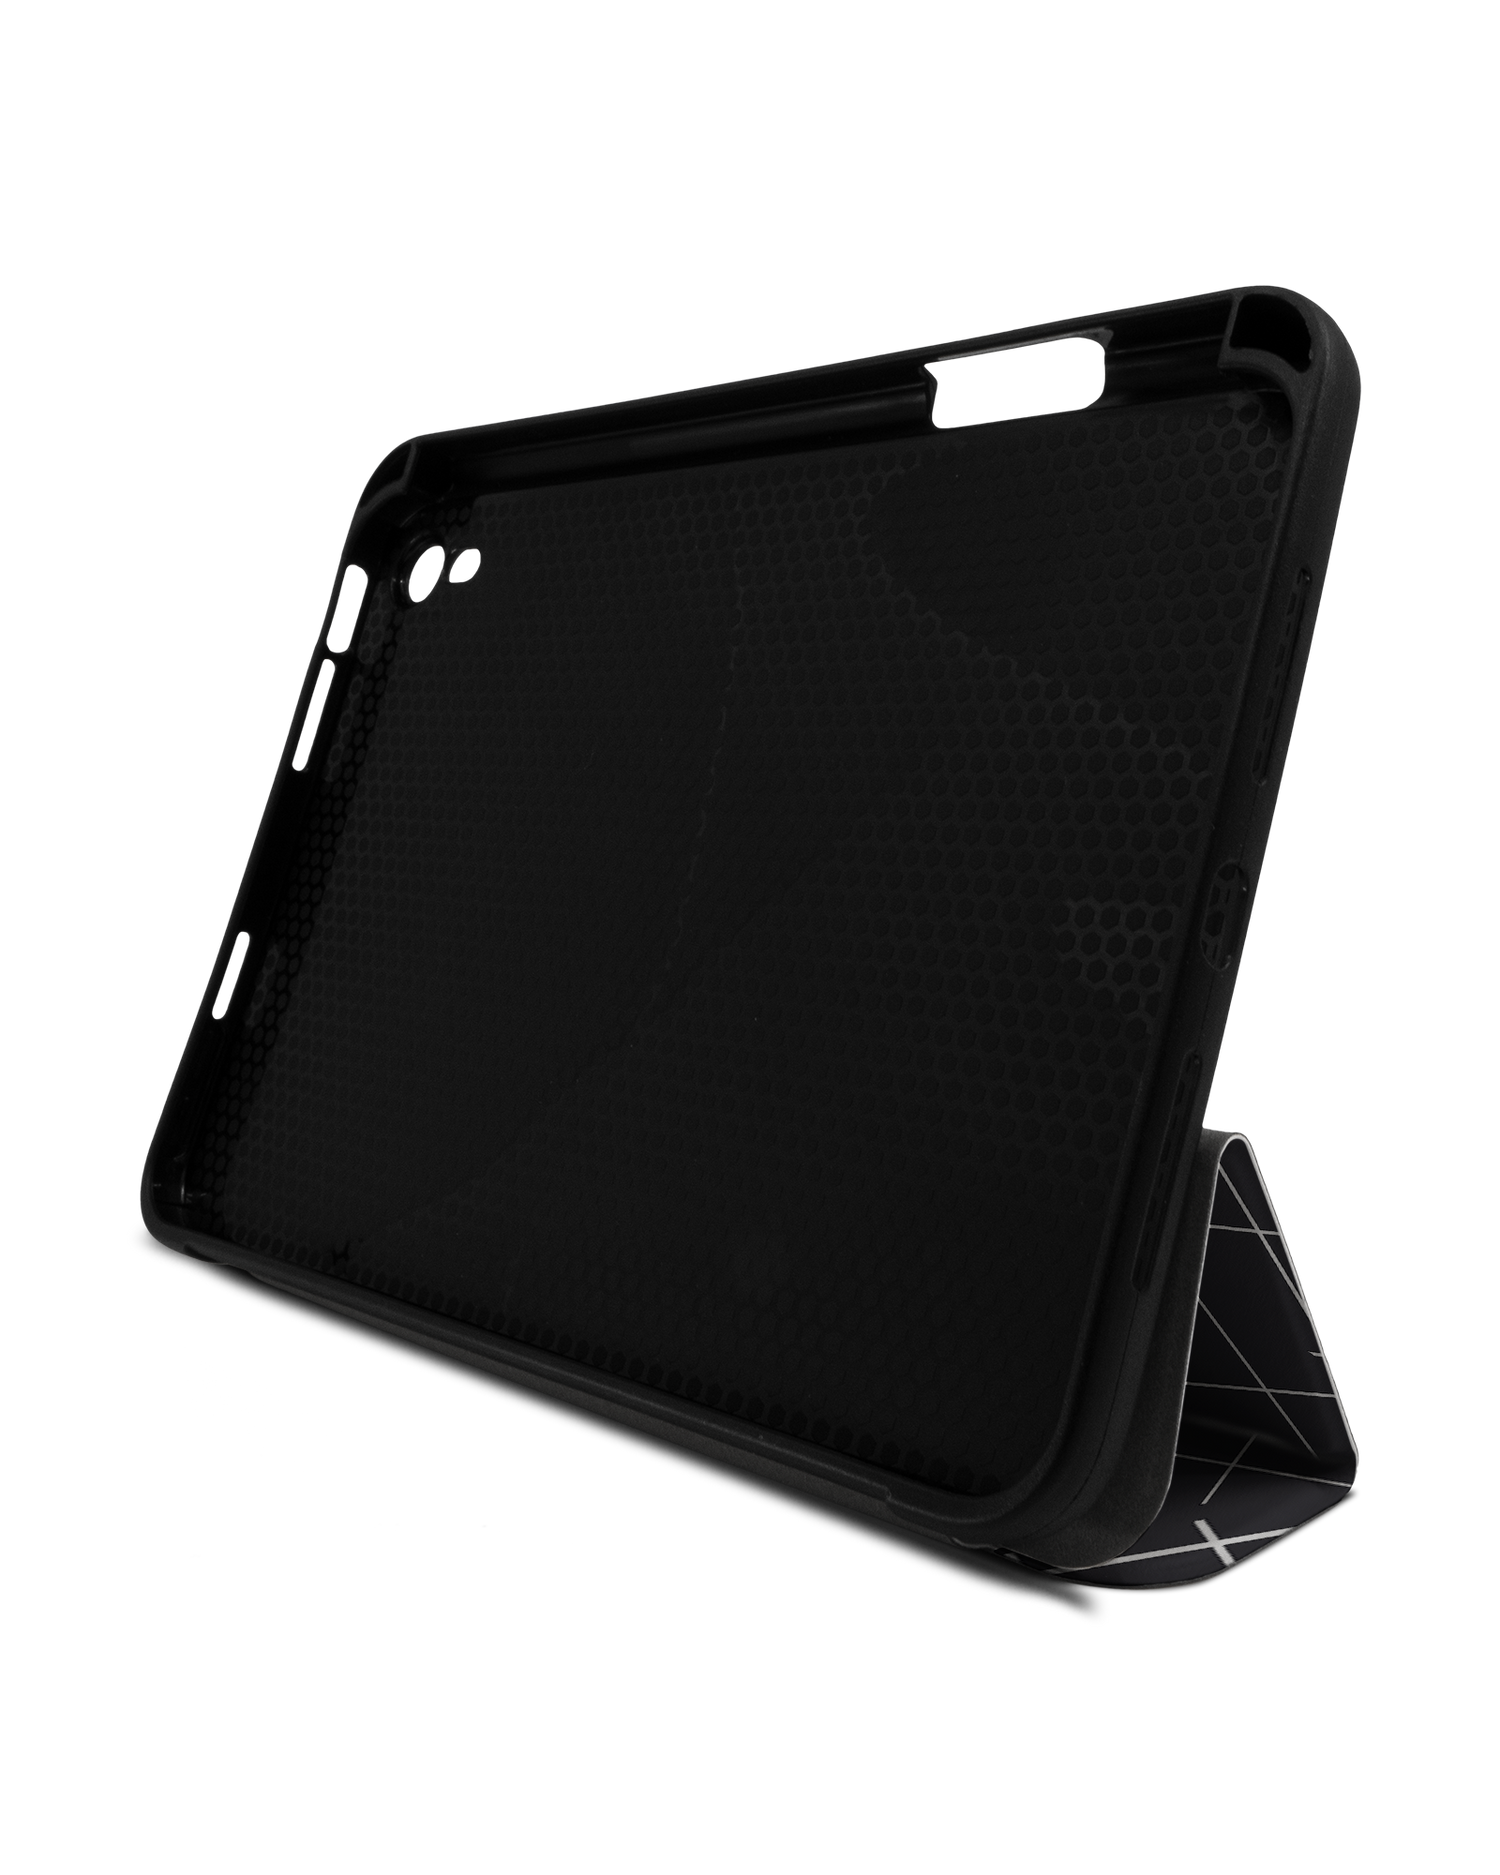 Grids iPad Case with Pencil Holder Apple iPad mini 6 (2021): Set up in landscape format (front view)